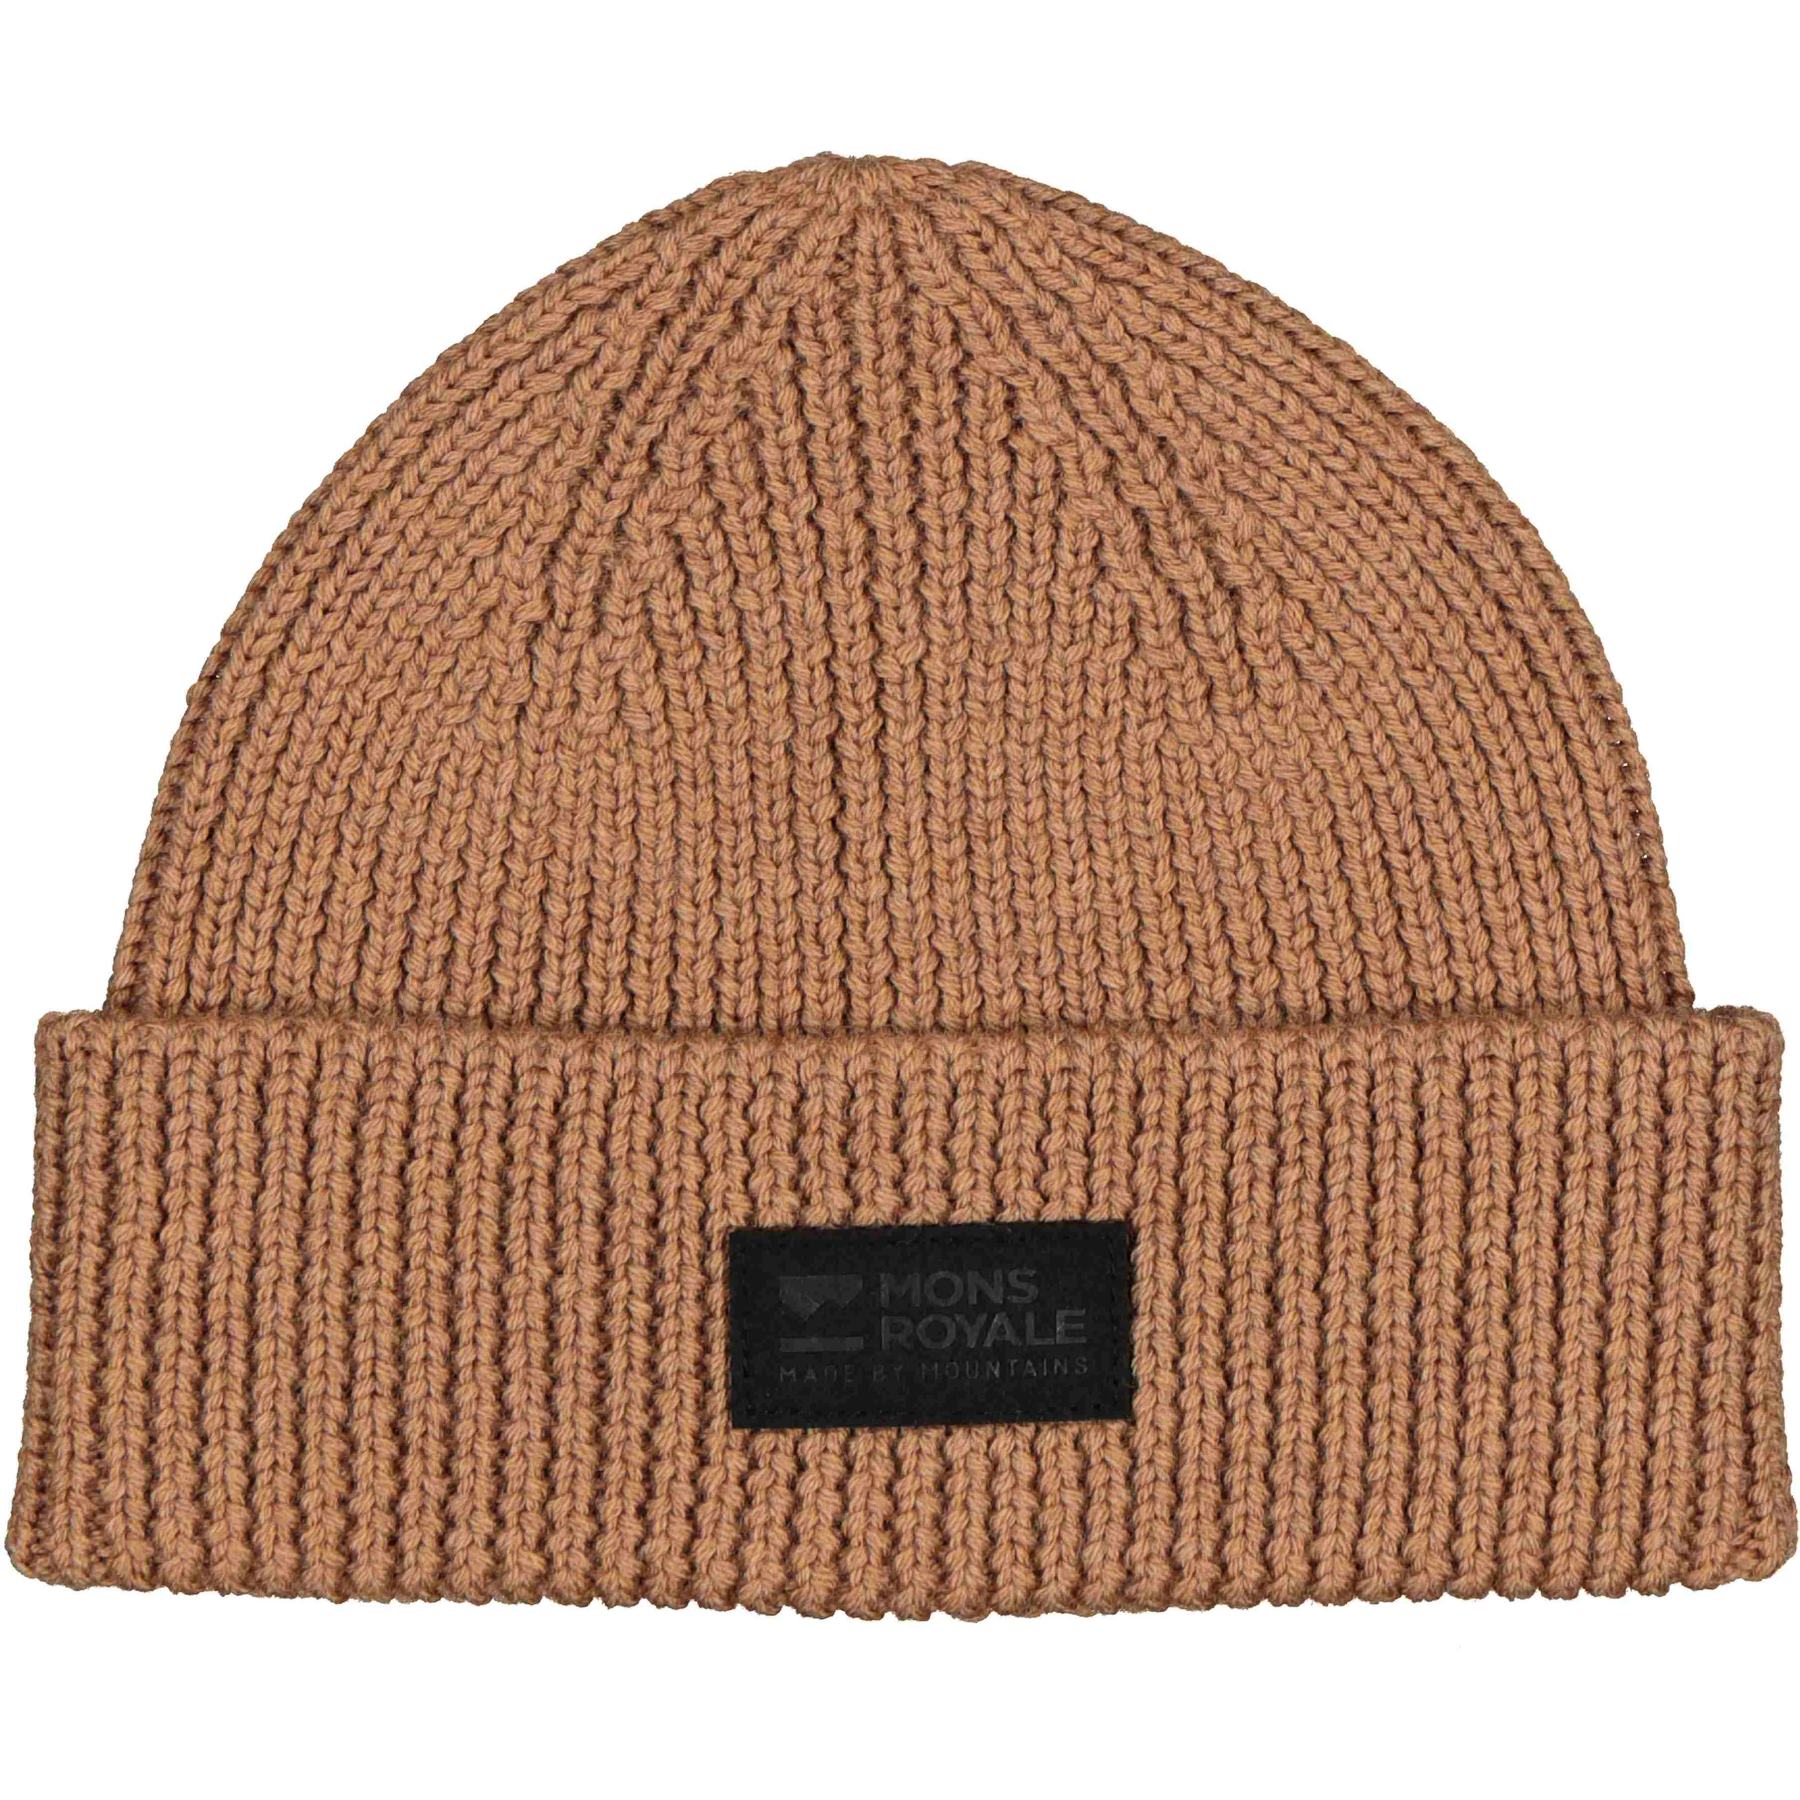 Picture of Mons Royale Fishermans Beanie - toffee marl